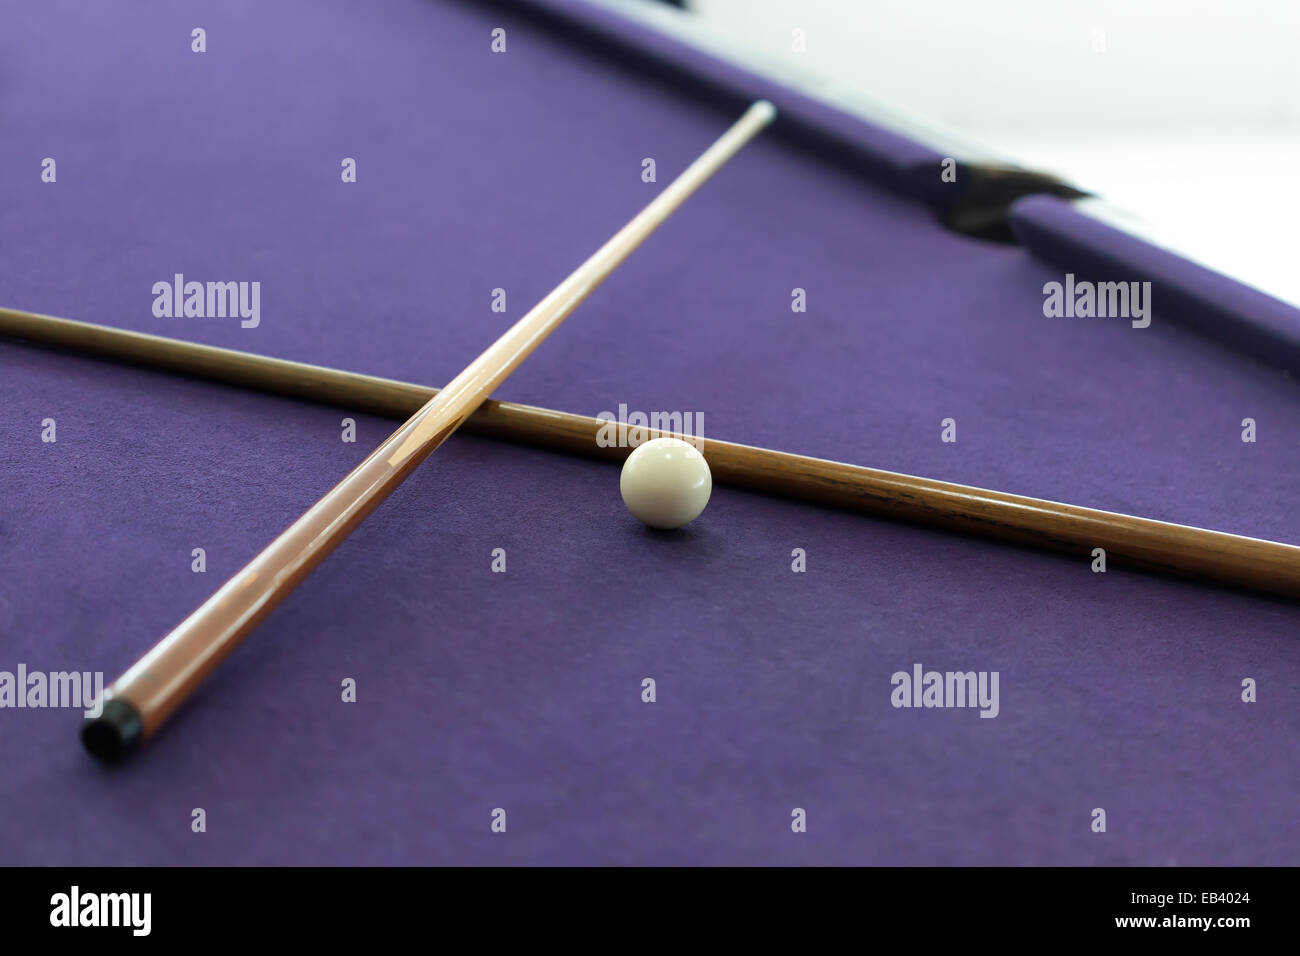 Billiard cues and white ball in pool table Stock Photo